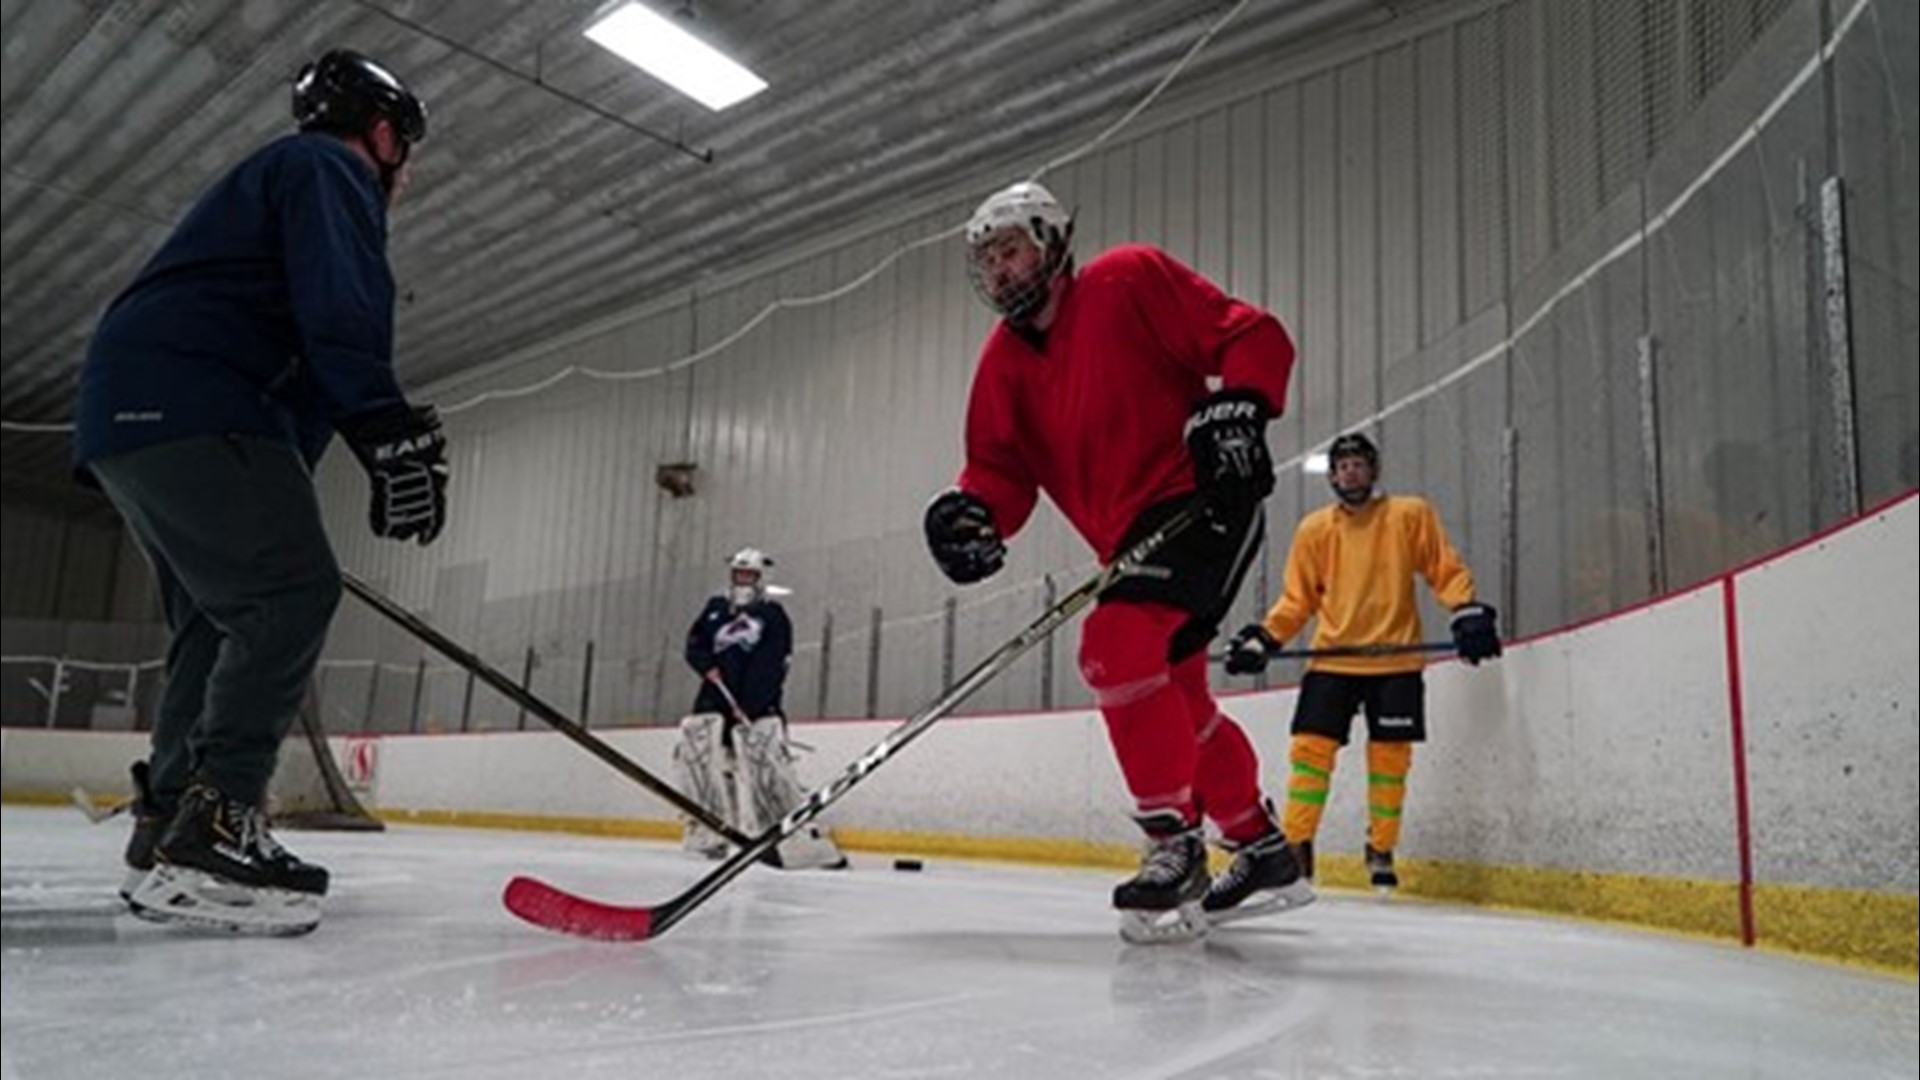 Colorado's visually impaired hockey players lace up their skates as part of the Visionaries Blind Hockey program to play the sport they love on the ice.